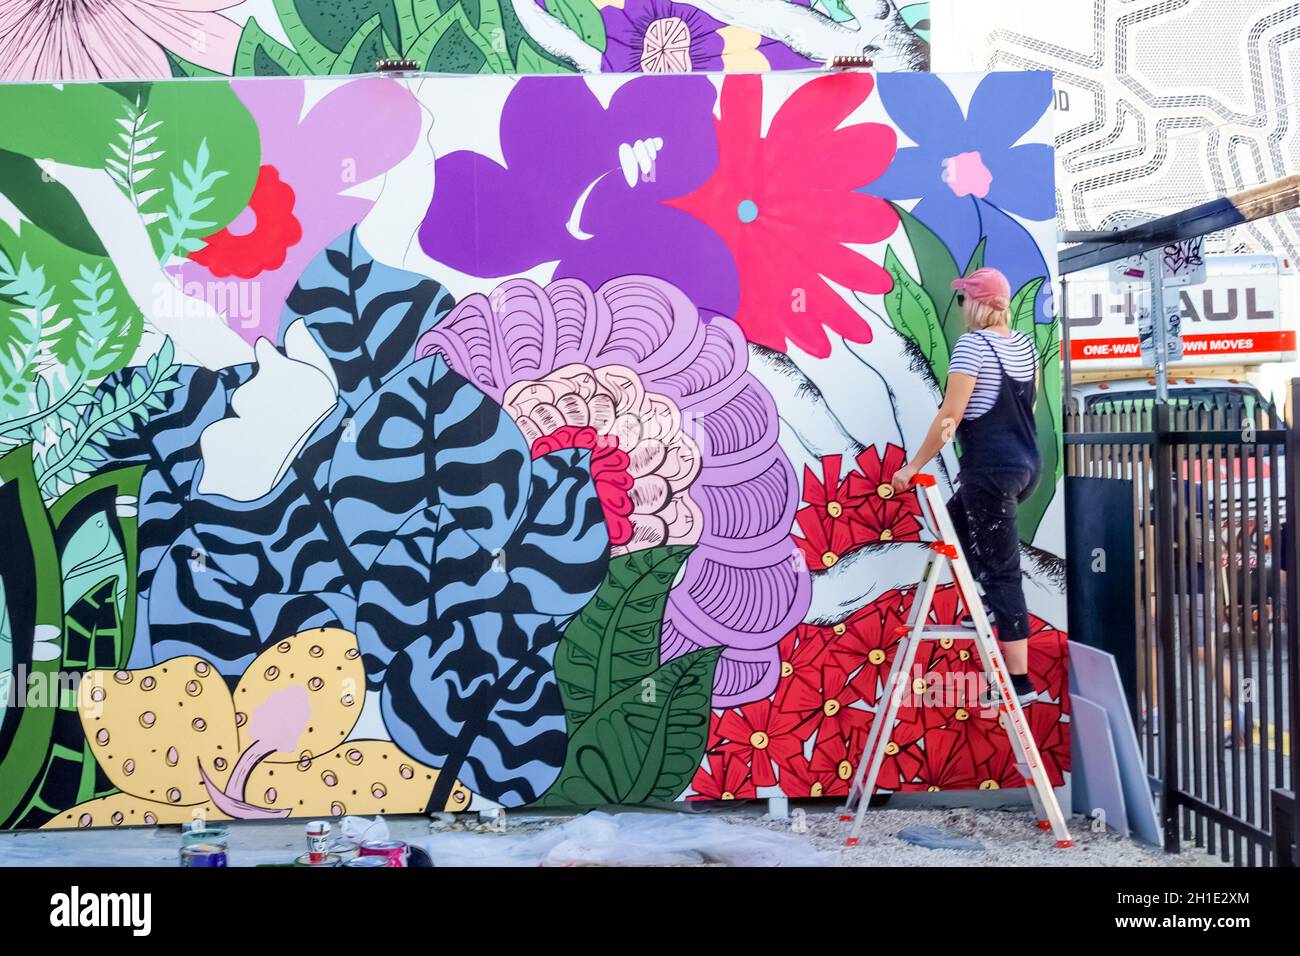 Miami, United States of America - November 30, 2019: The artist working at Art Wynwood in Miami, USA. Wynwood is a neighborhood in Miami Florida which Stock Photo